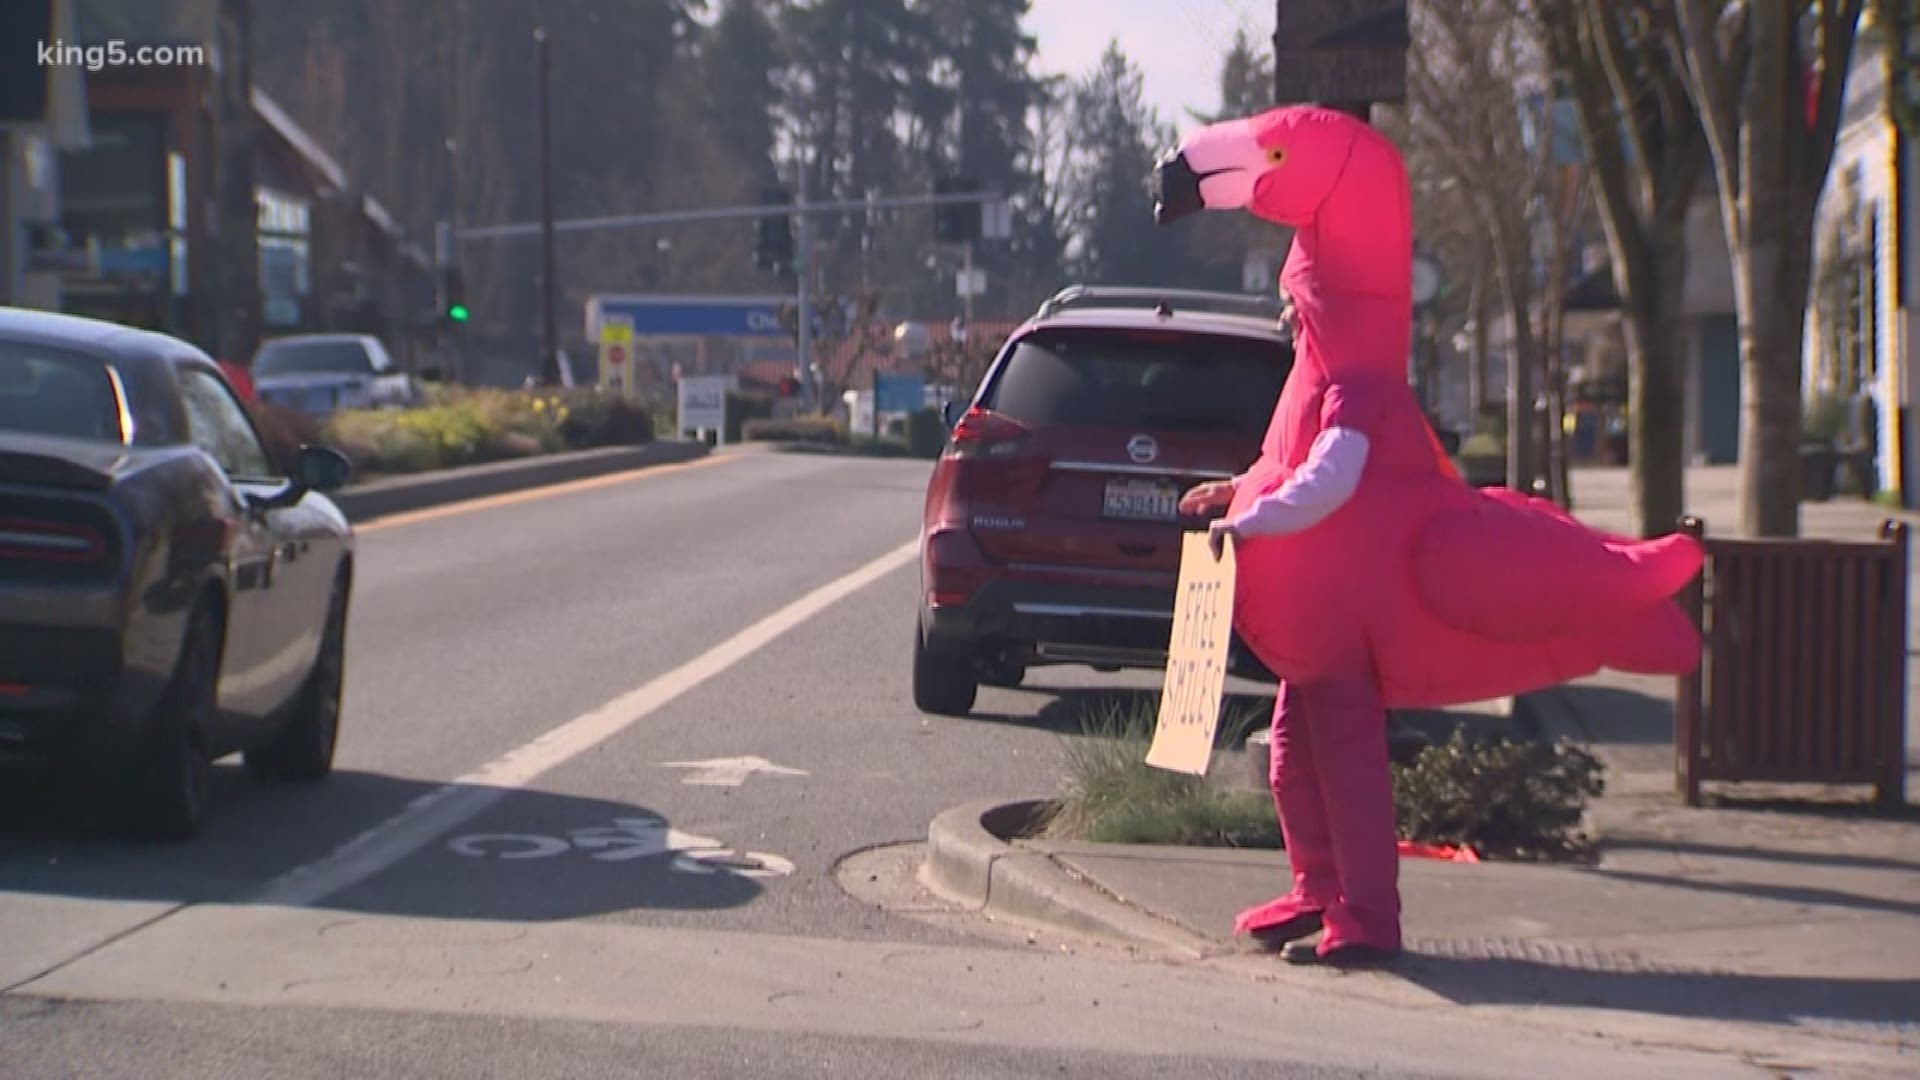 He stands on a corner of the street in an inflatable flamingo costume to bring smiles during a tense time.